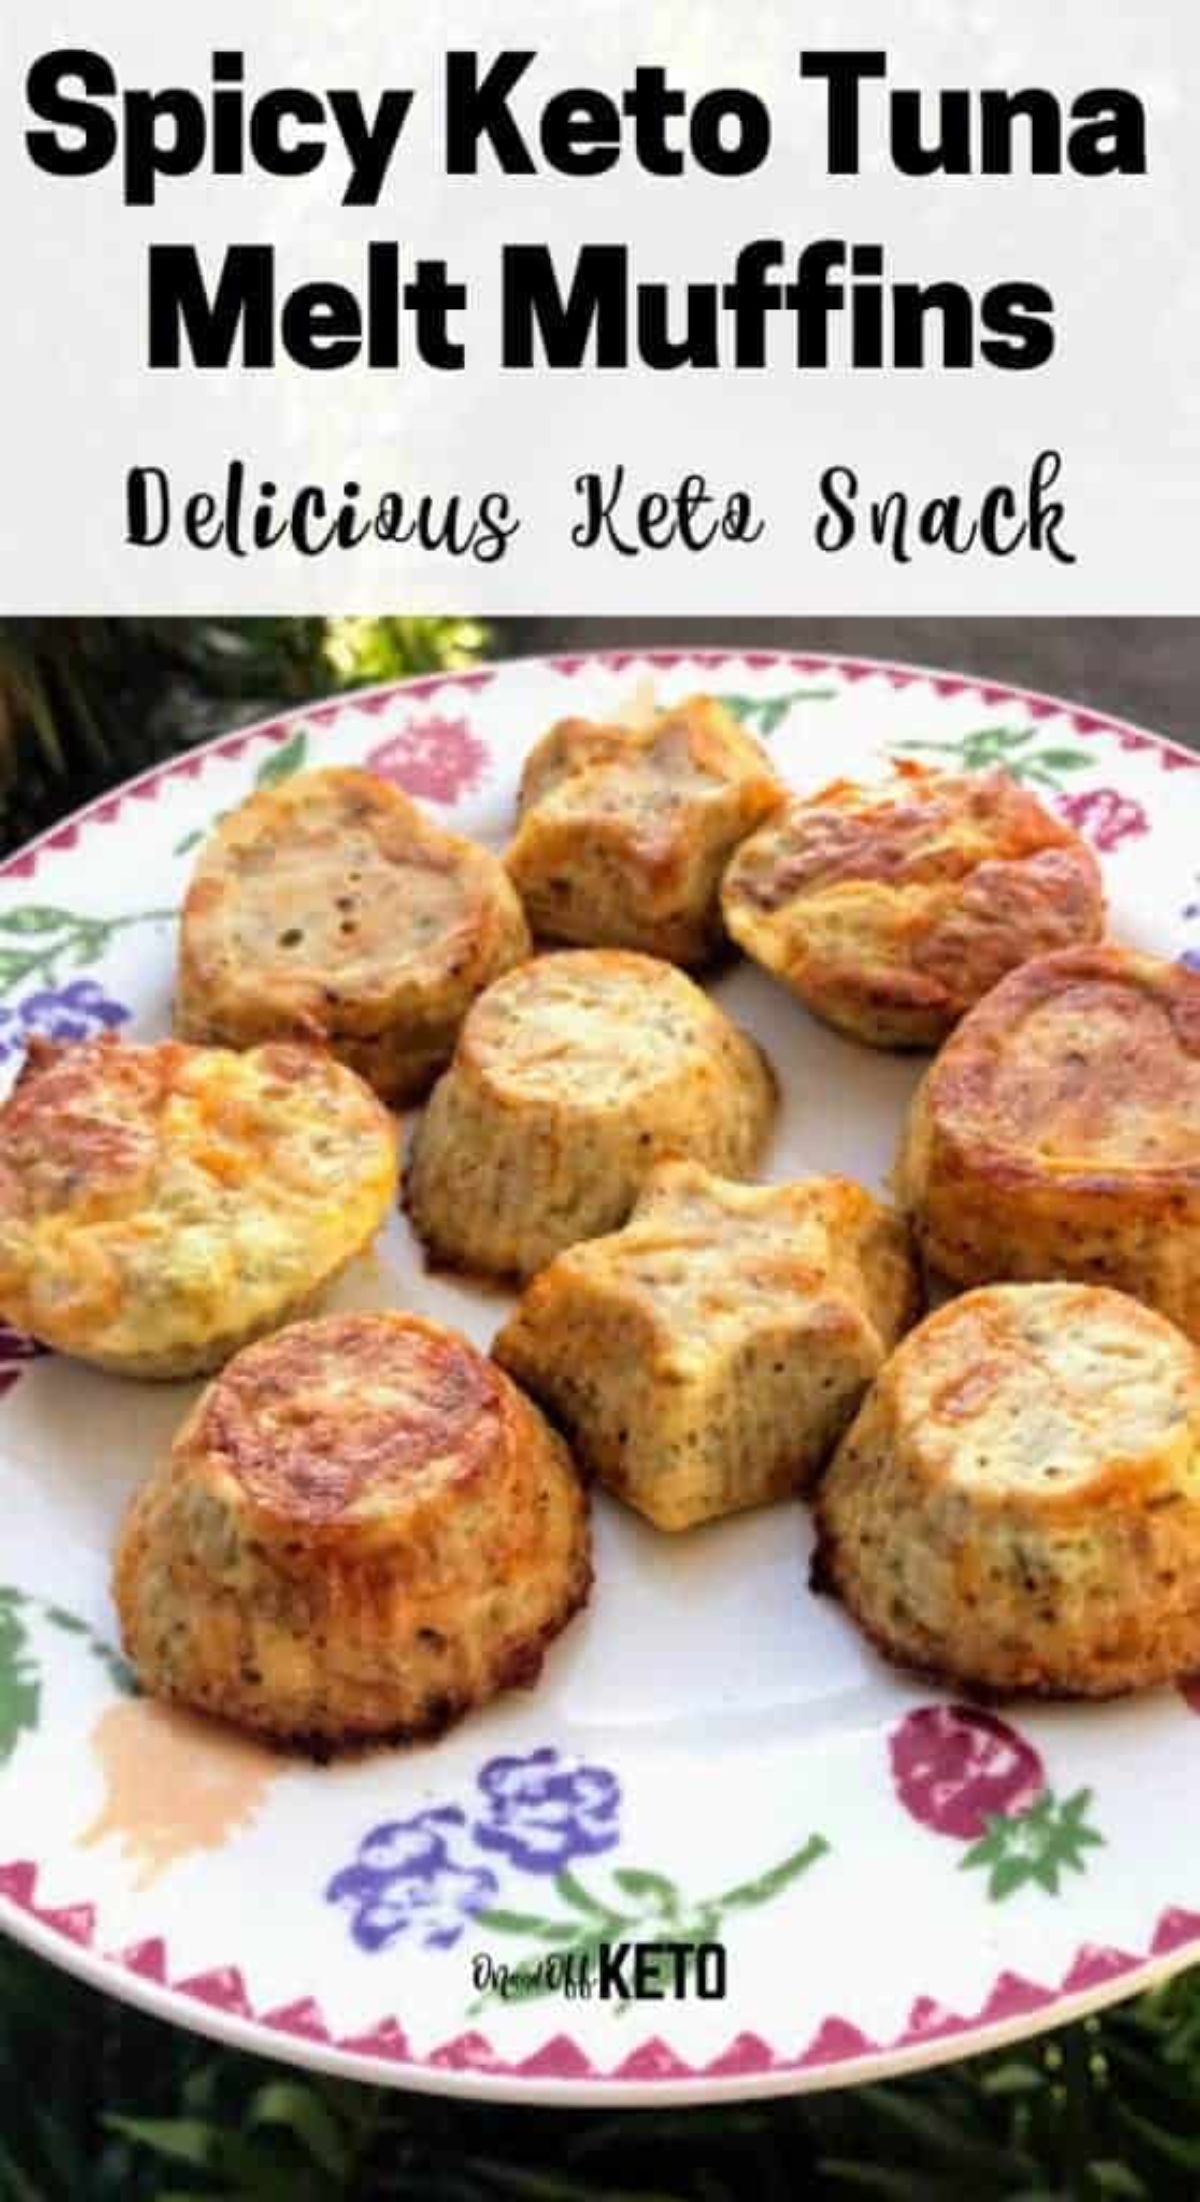 The text reads "Spicy Keto Tuna Melt Muffins. Delicious Keto Snack" The photo is of a round white plate with flower patterns around the rim. On it are different shaped small tuna melt muffins